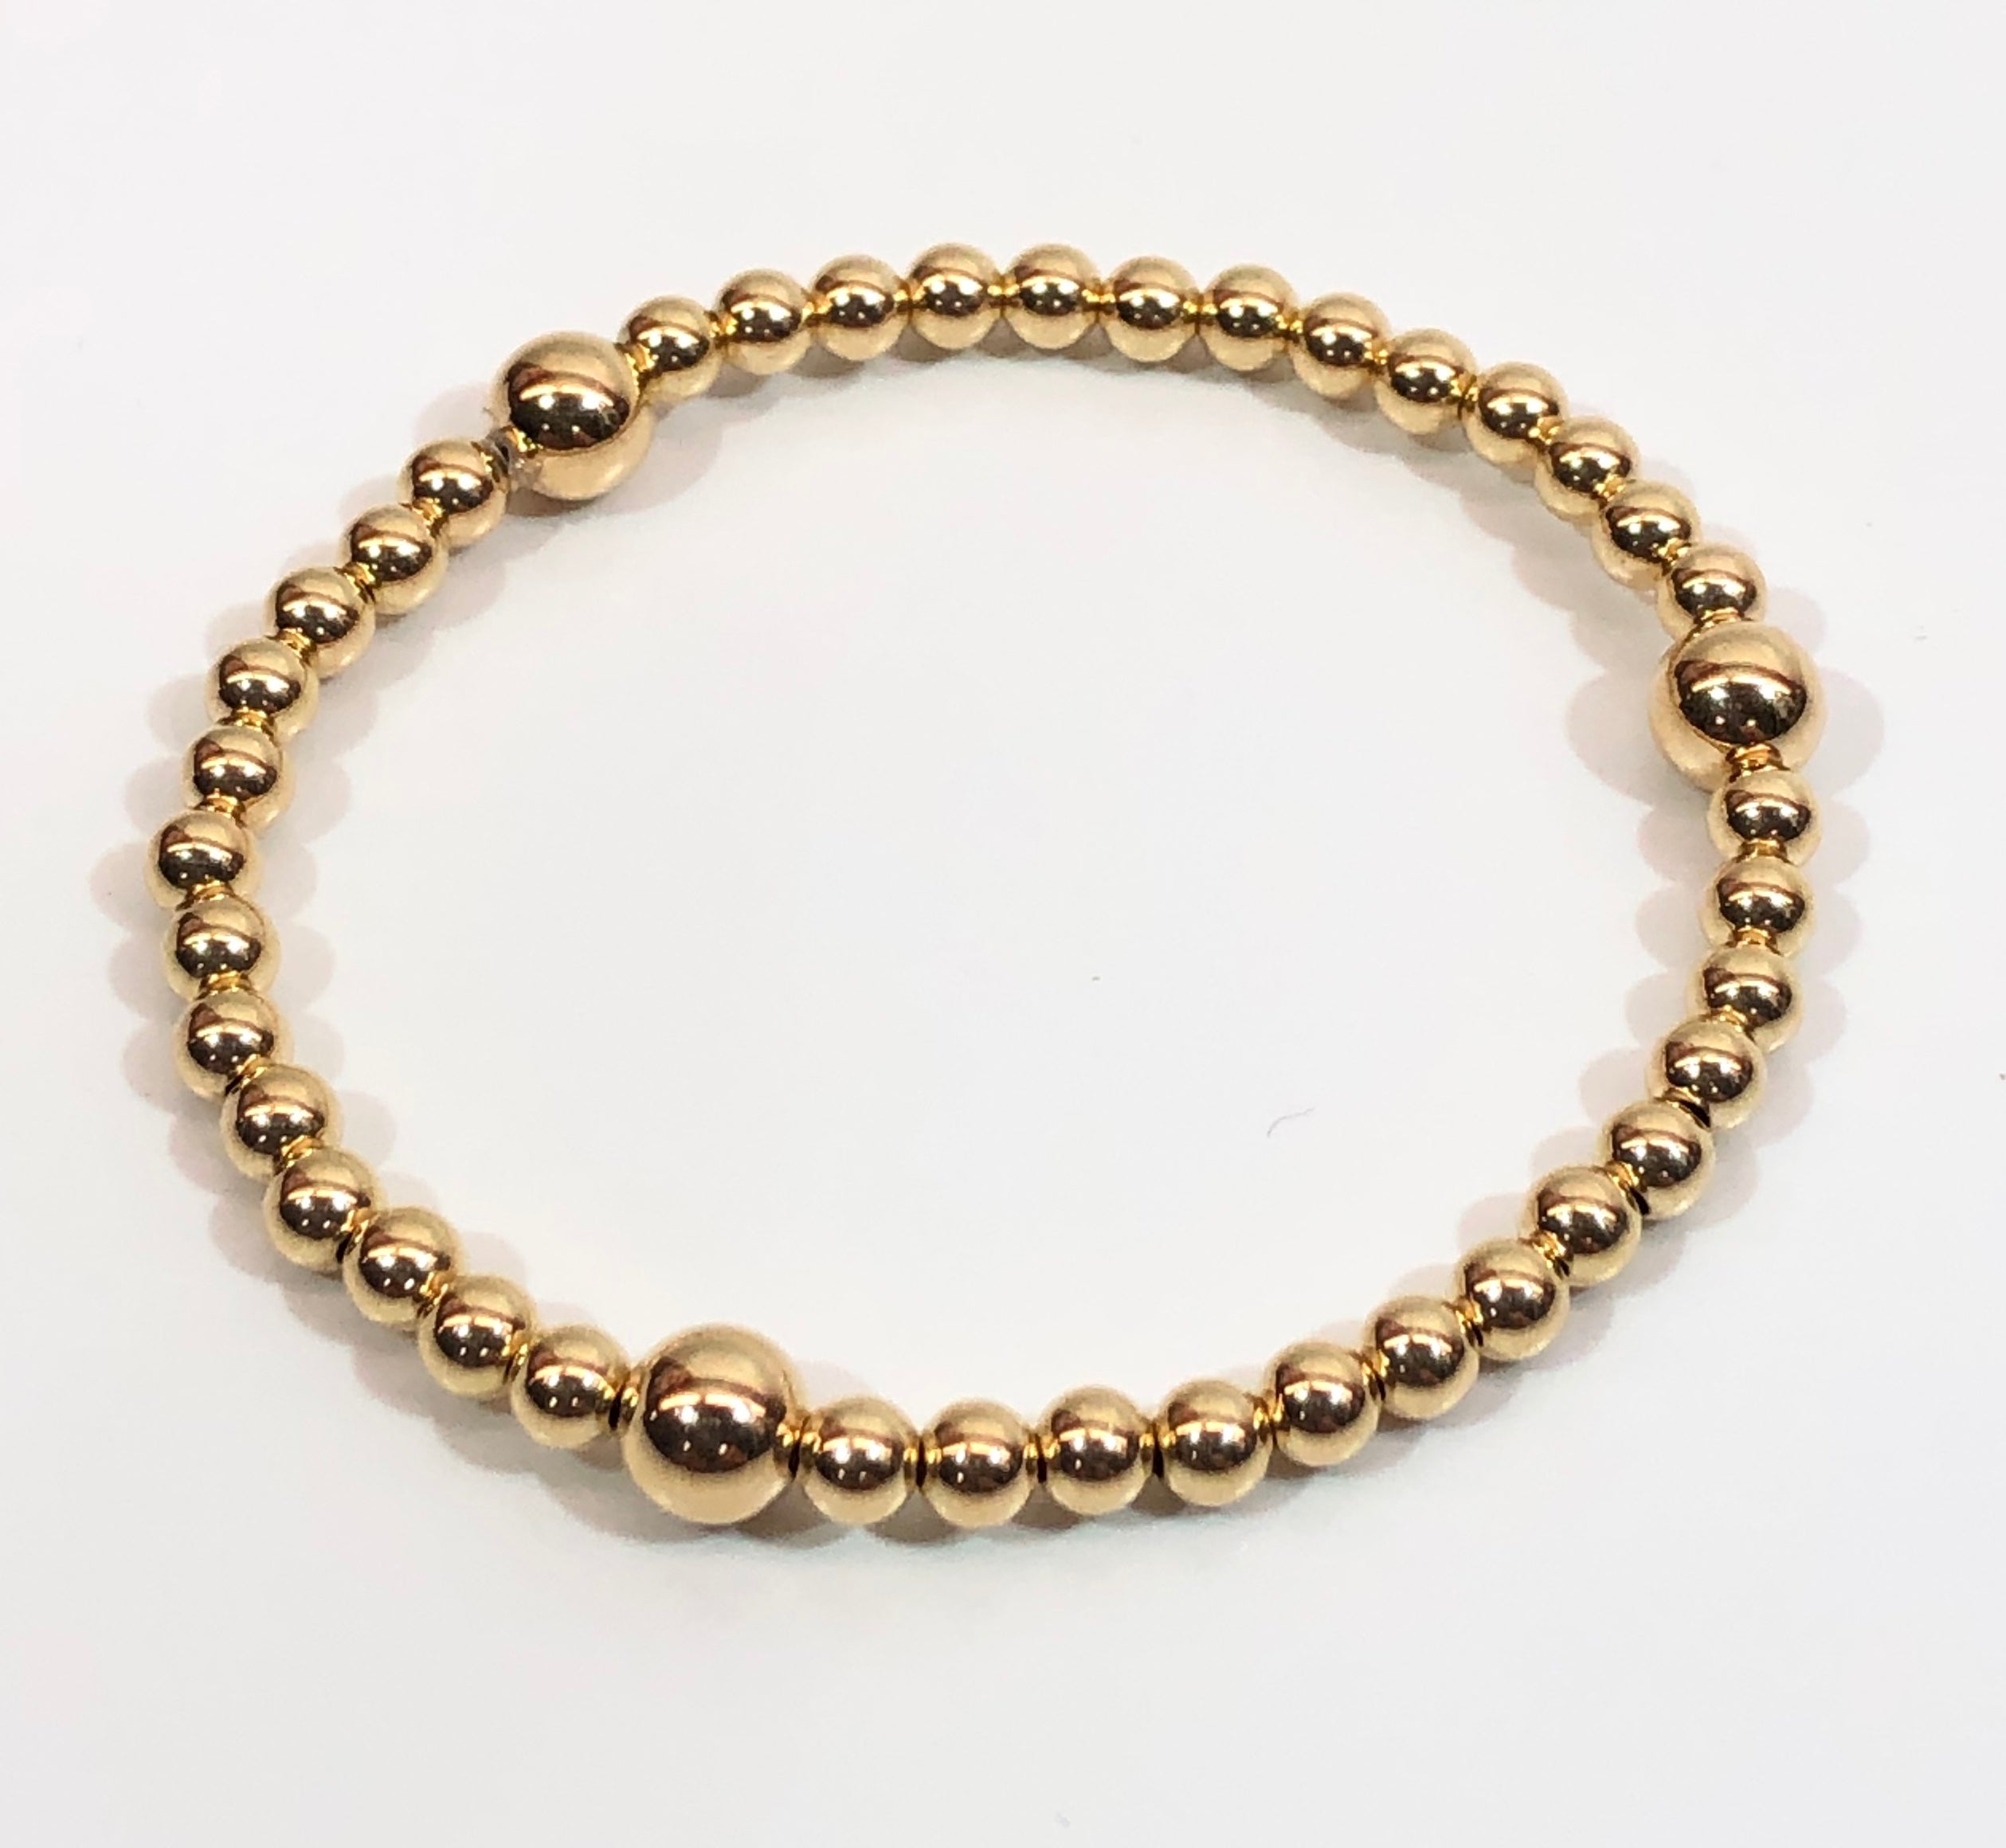 4mm 14kt Gold Filled Bead Bracelet with 3 6mm Gold Beads